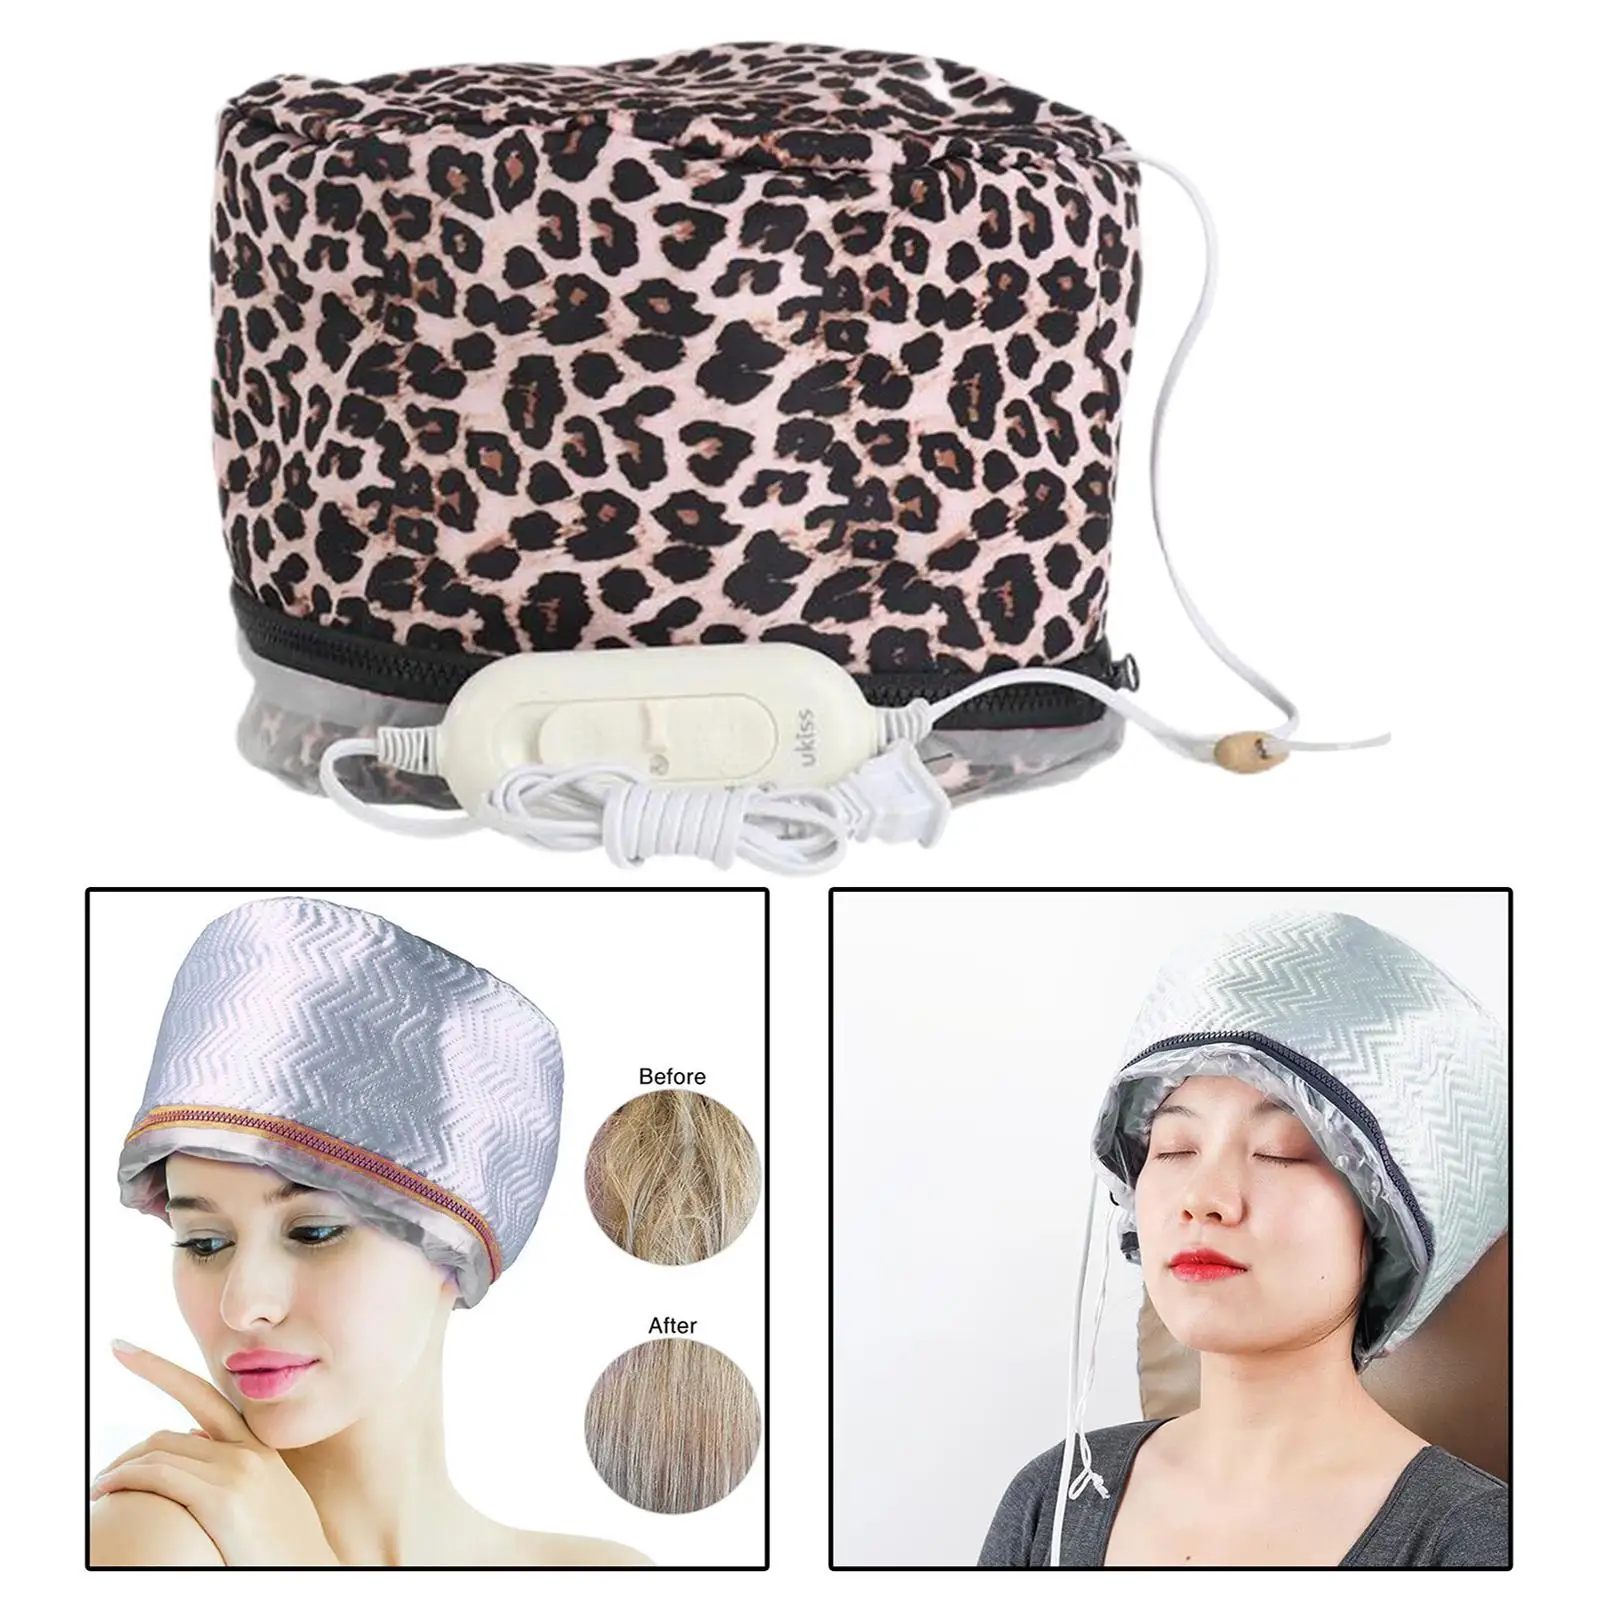  Care Steamer Hat  Deep Conditioner, Beauty Steamer Thermal Caps, 3 Modes Temperature Control Family Personal Care Heat 